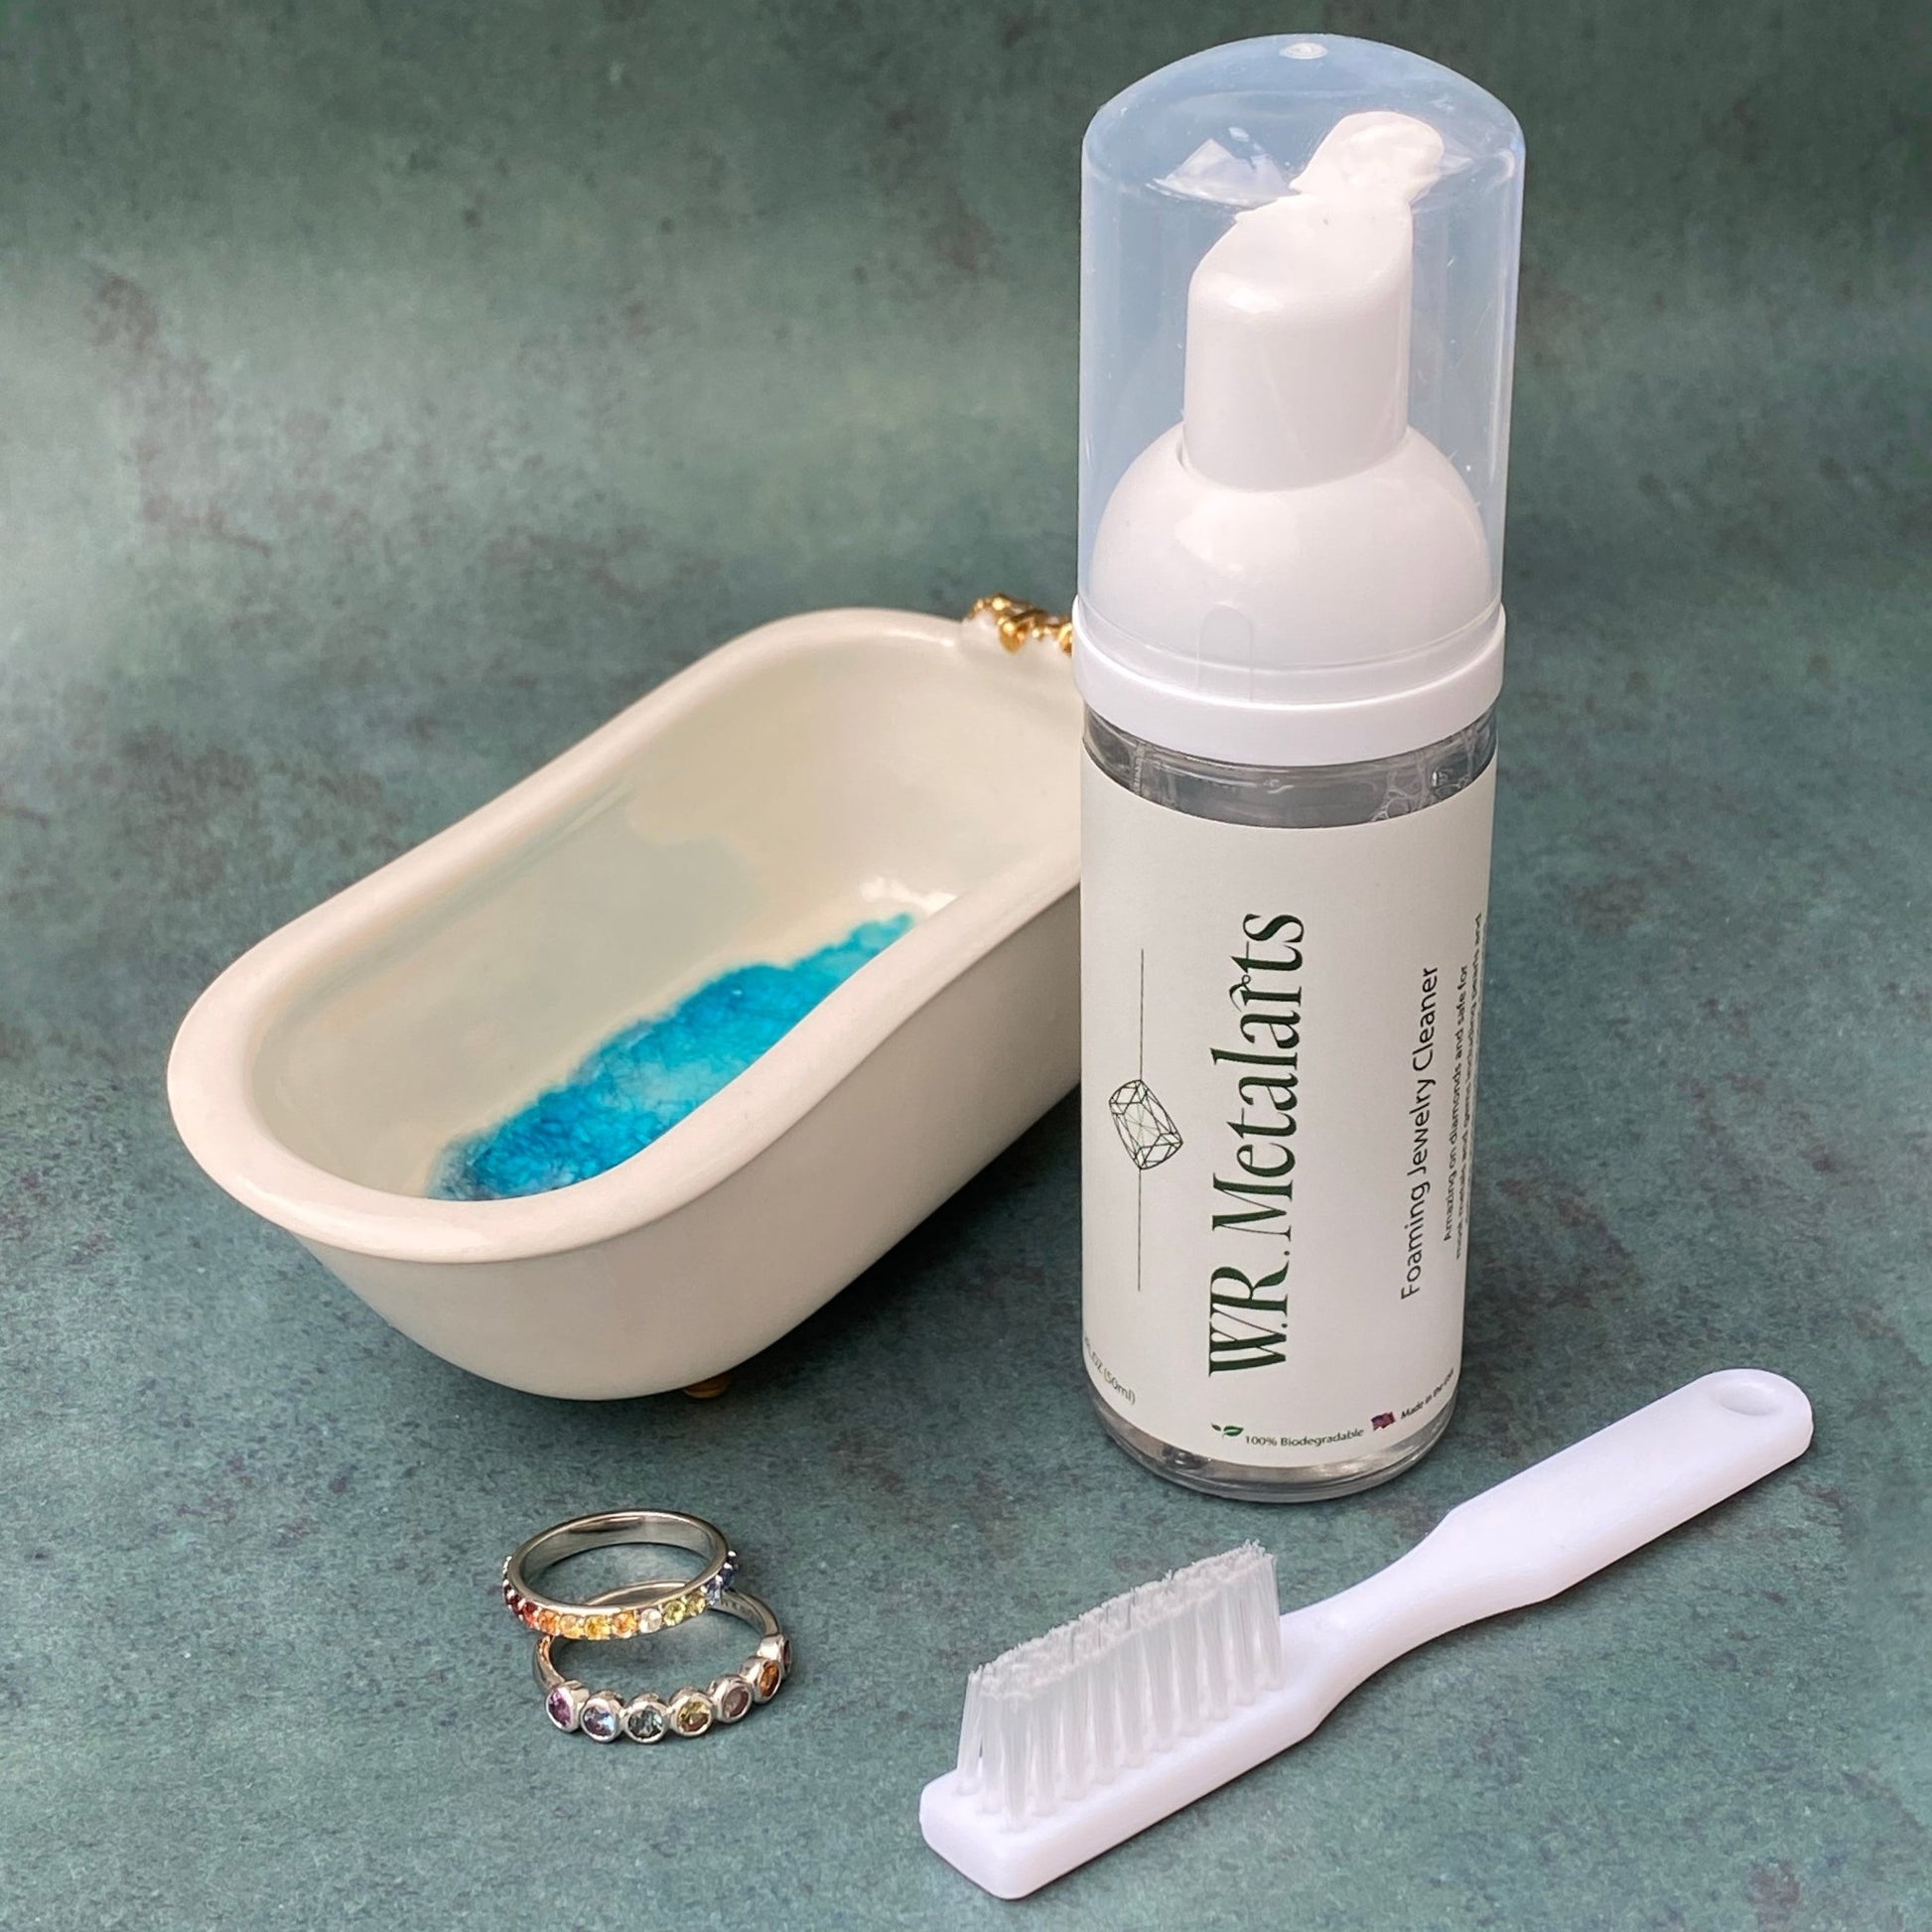 The Jewelry Cleaning Kit - W.R. Metalarts